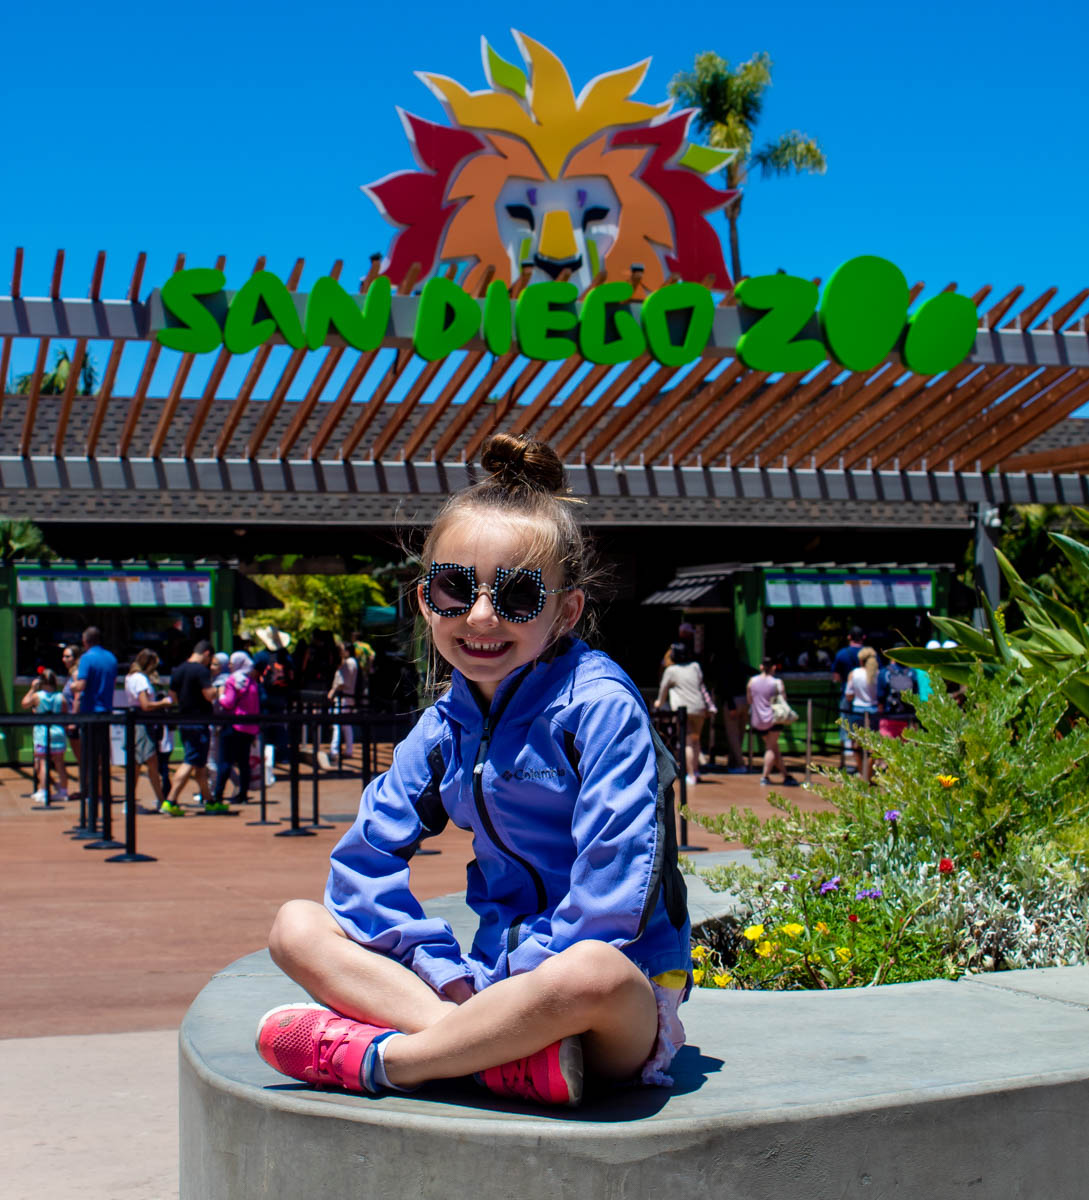 Visiting San Diego: 6 Fun Places To Take Your Kids